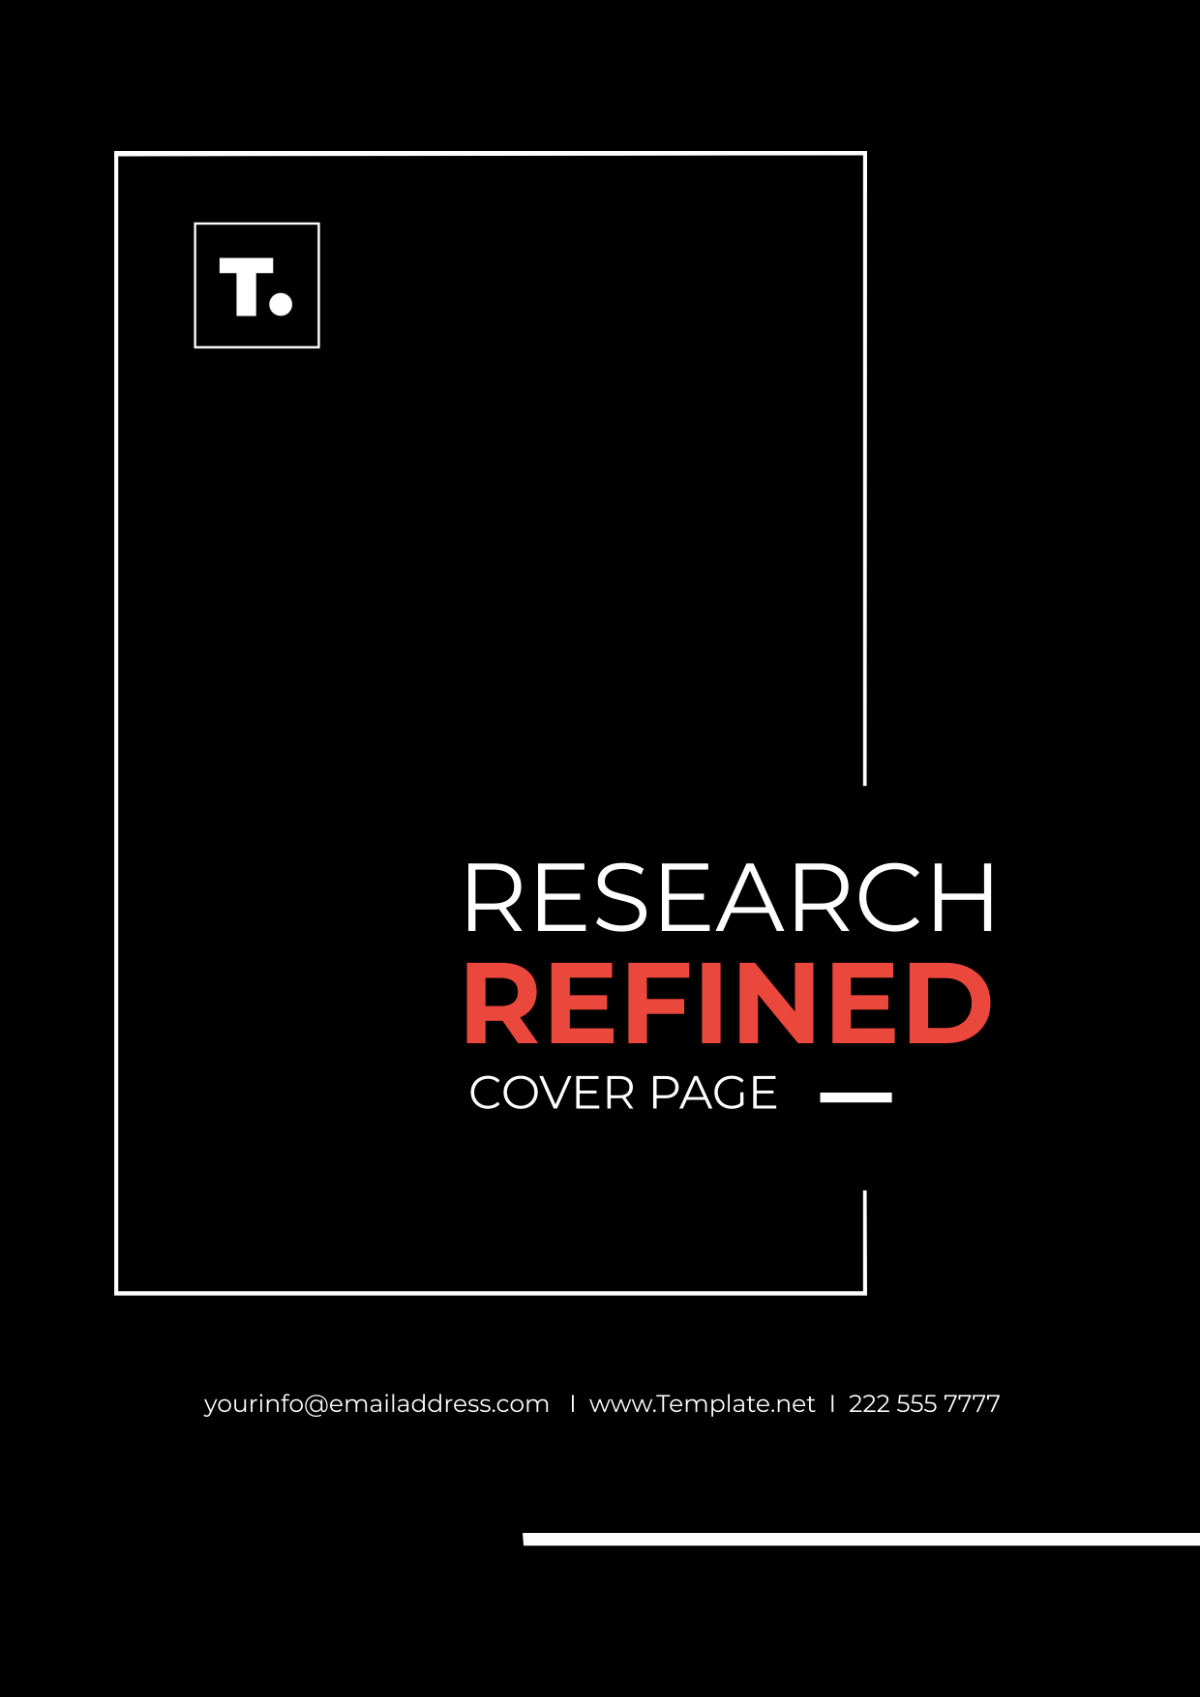 Research Refined Cover Page Template